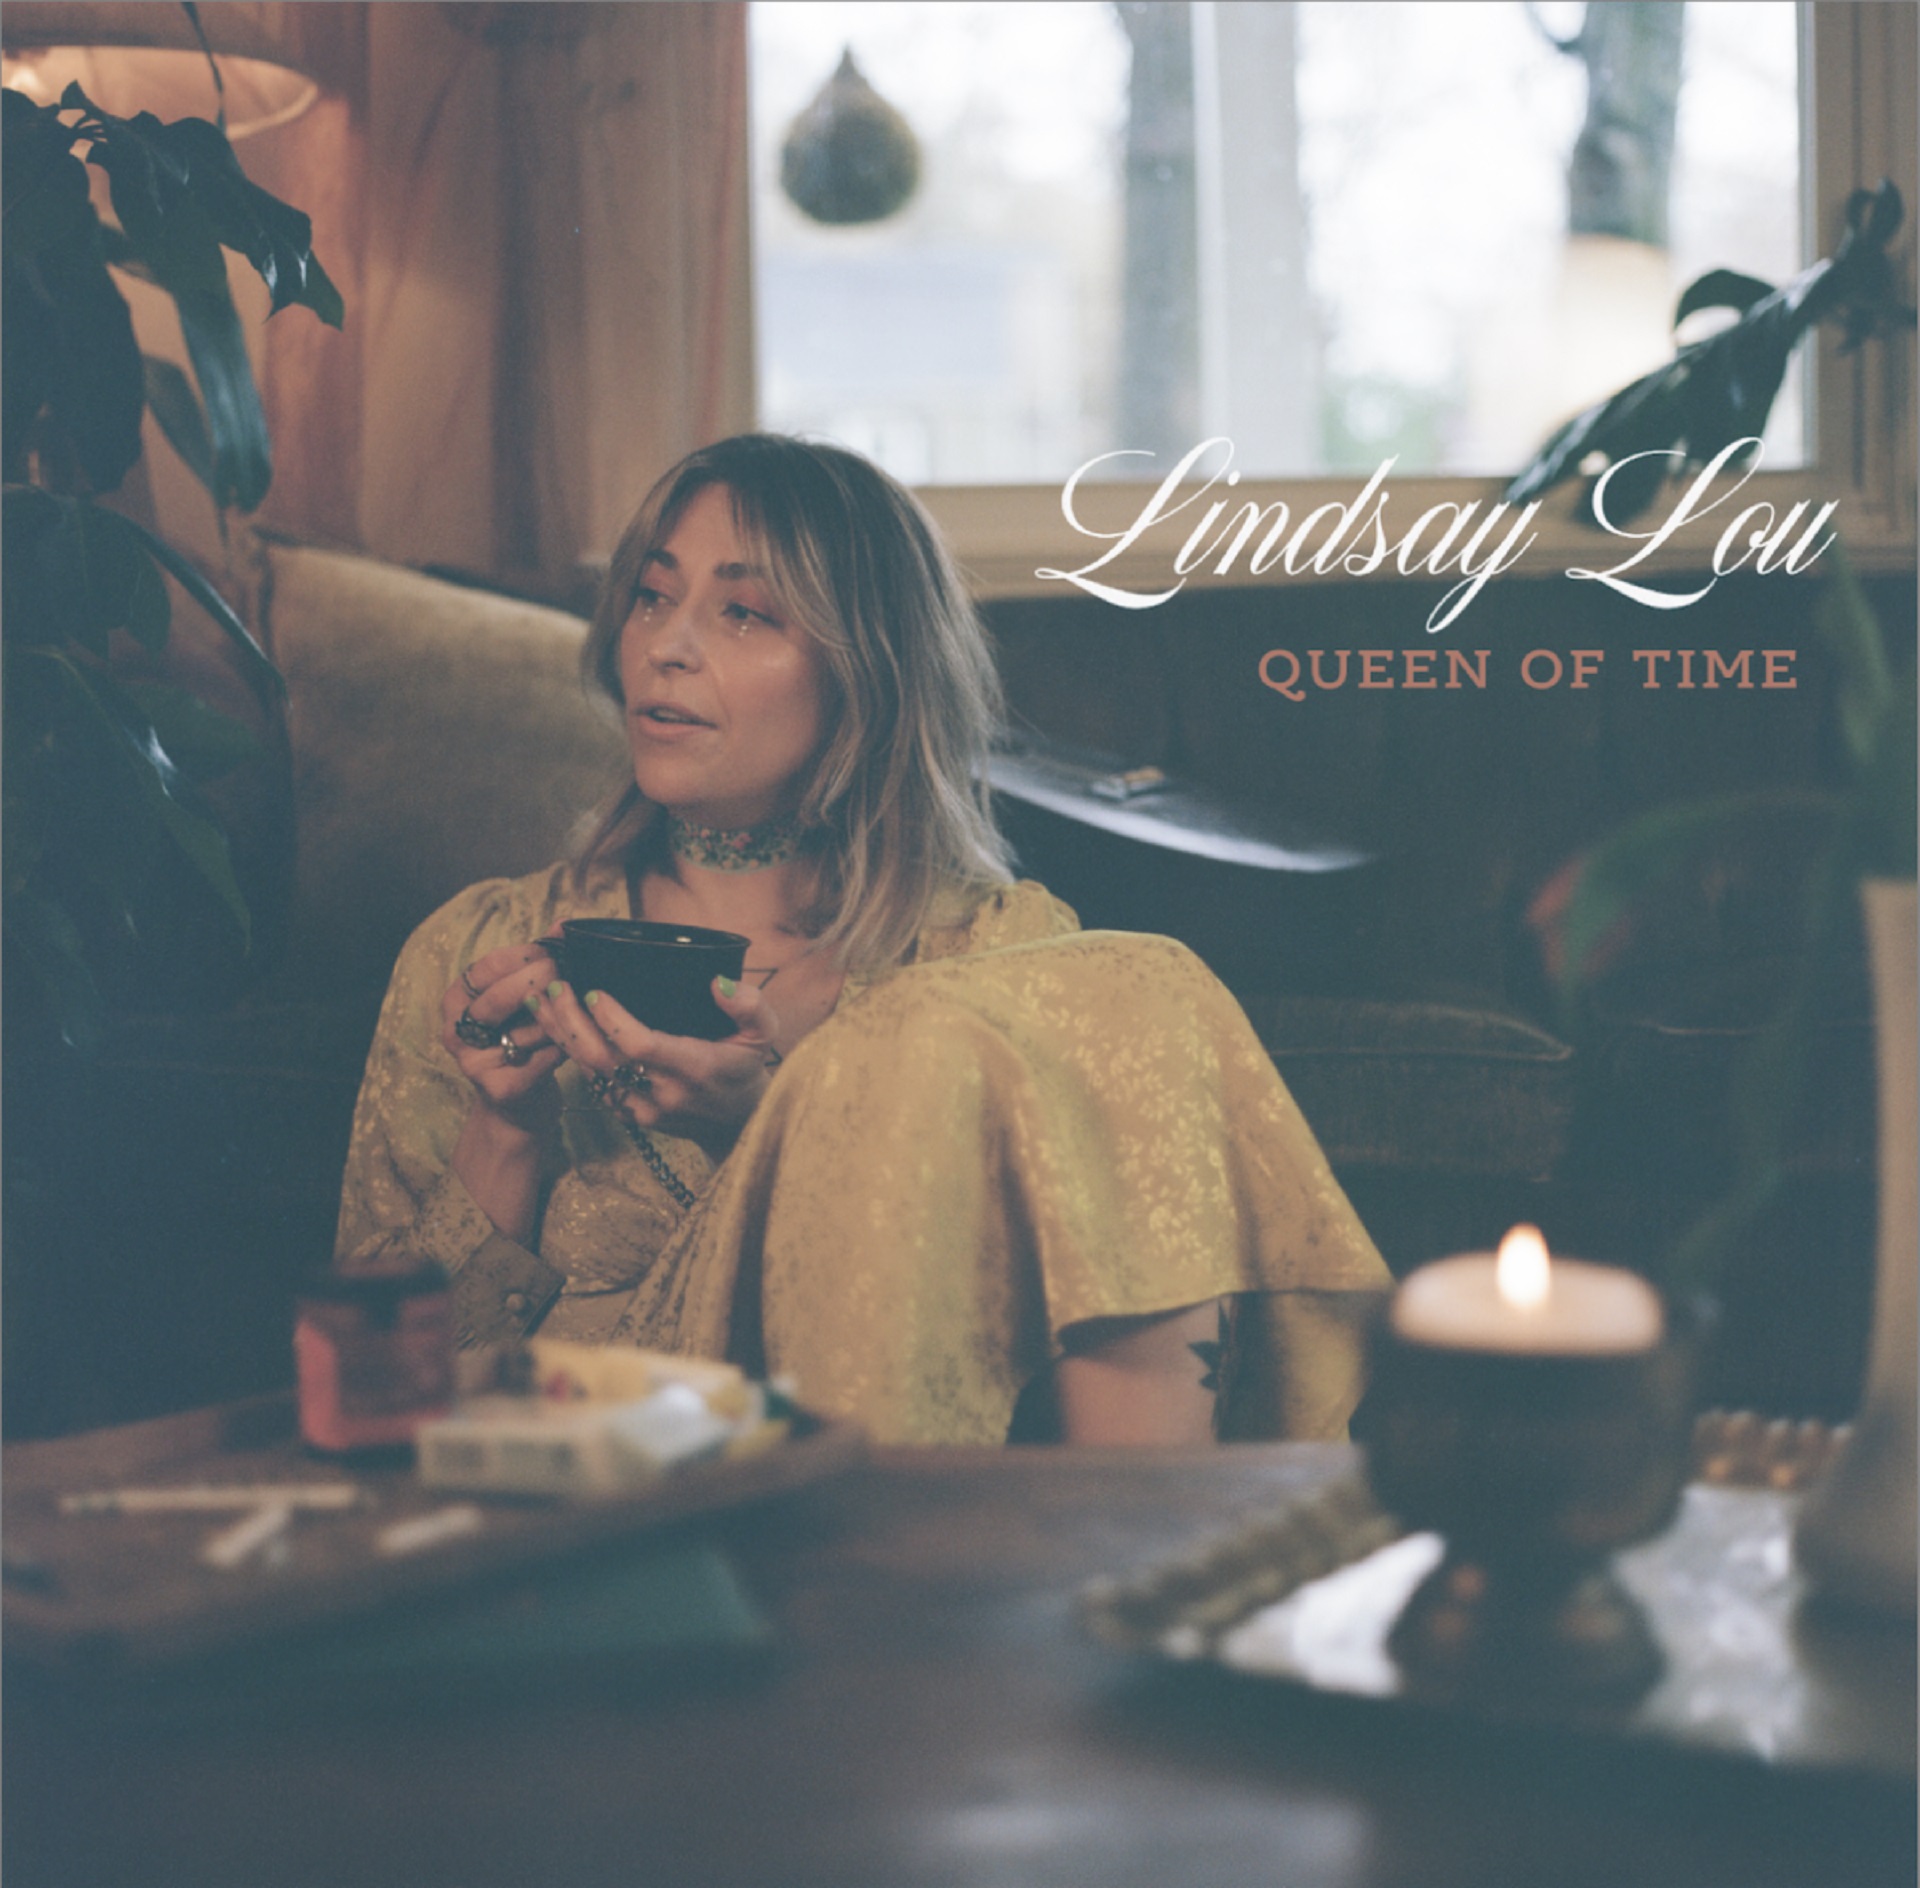 LINDSAY LOU joins The Wood Brothers for select shows and announces tour and festival dates